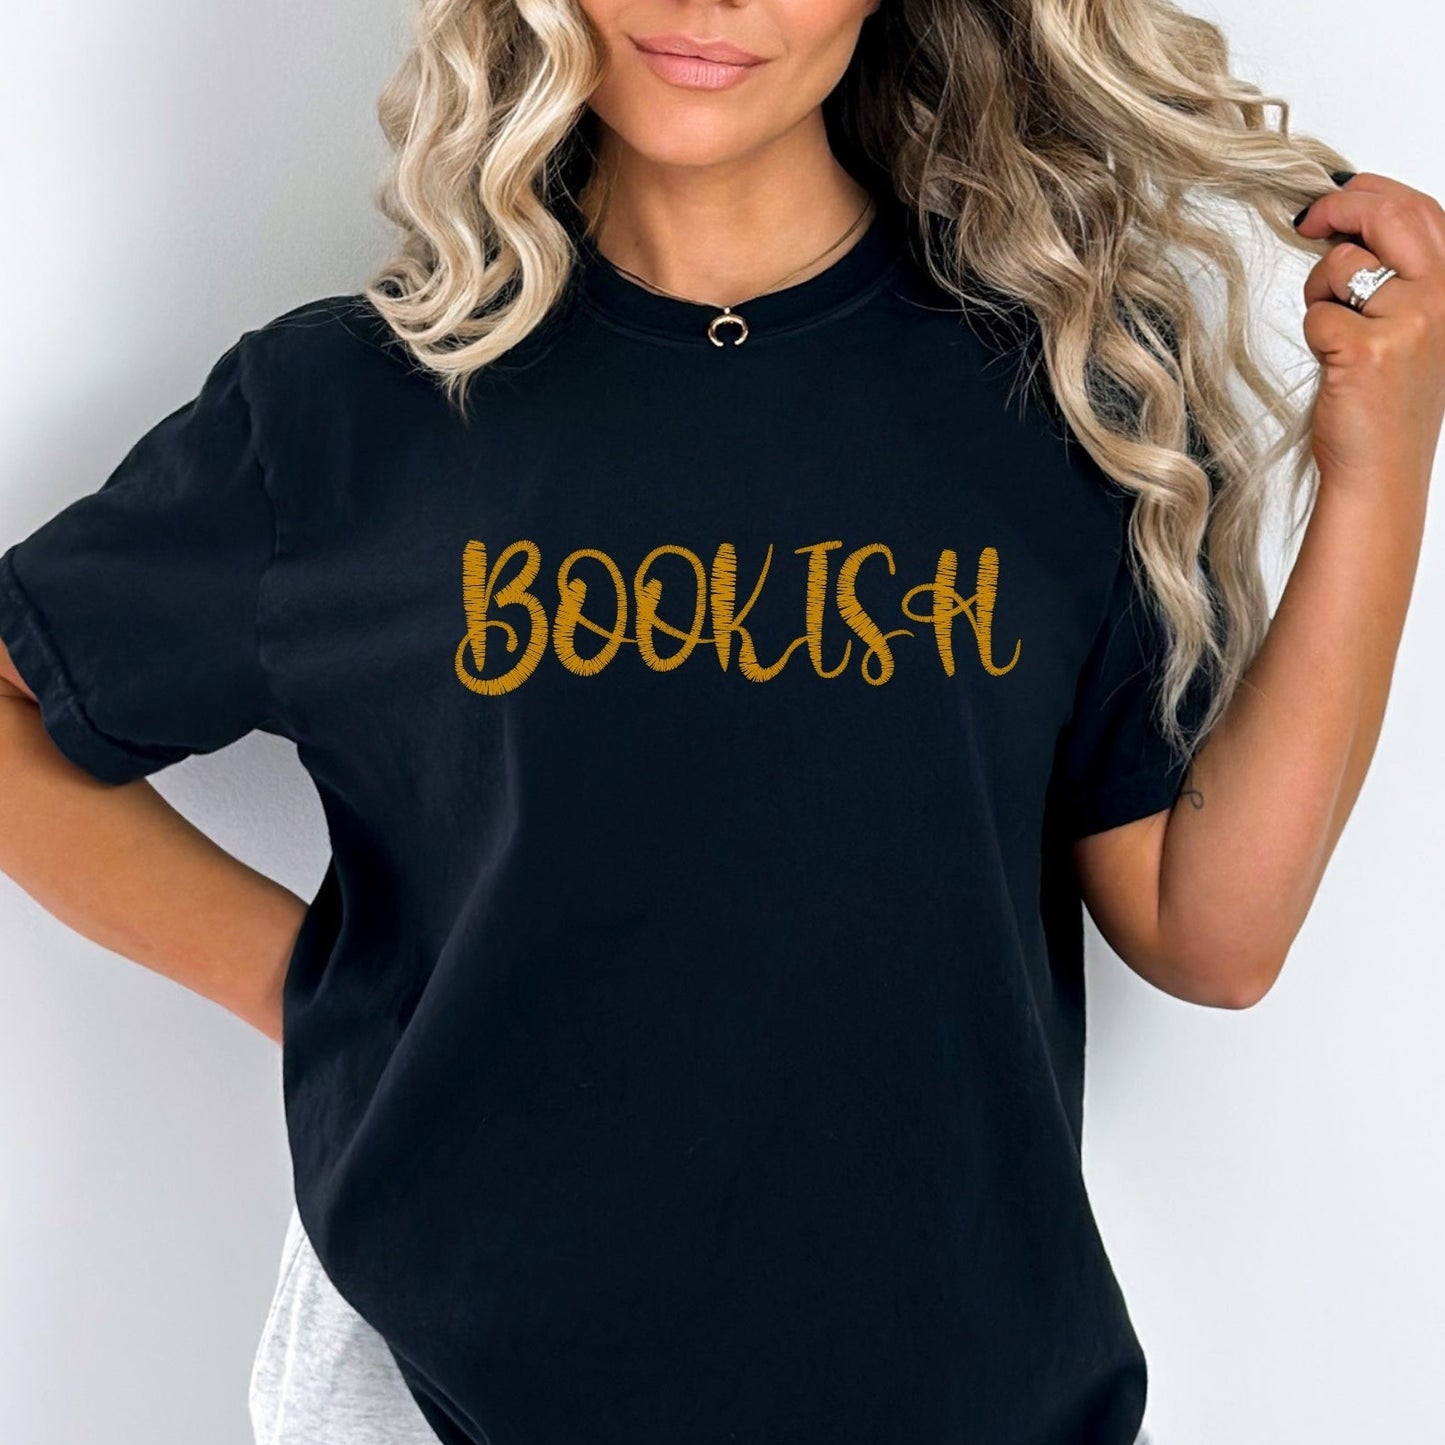 Bookish Faux Embroidery Tee - Comfort Colors Bookish Shirt